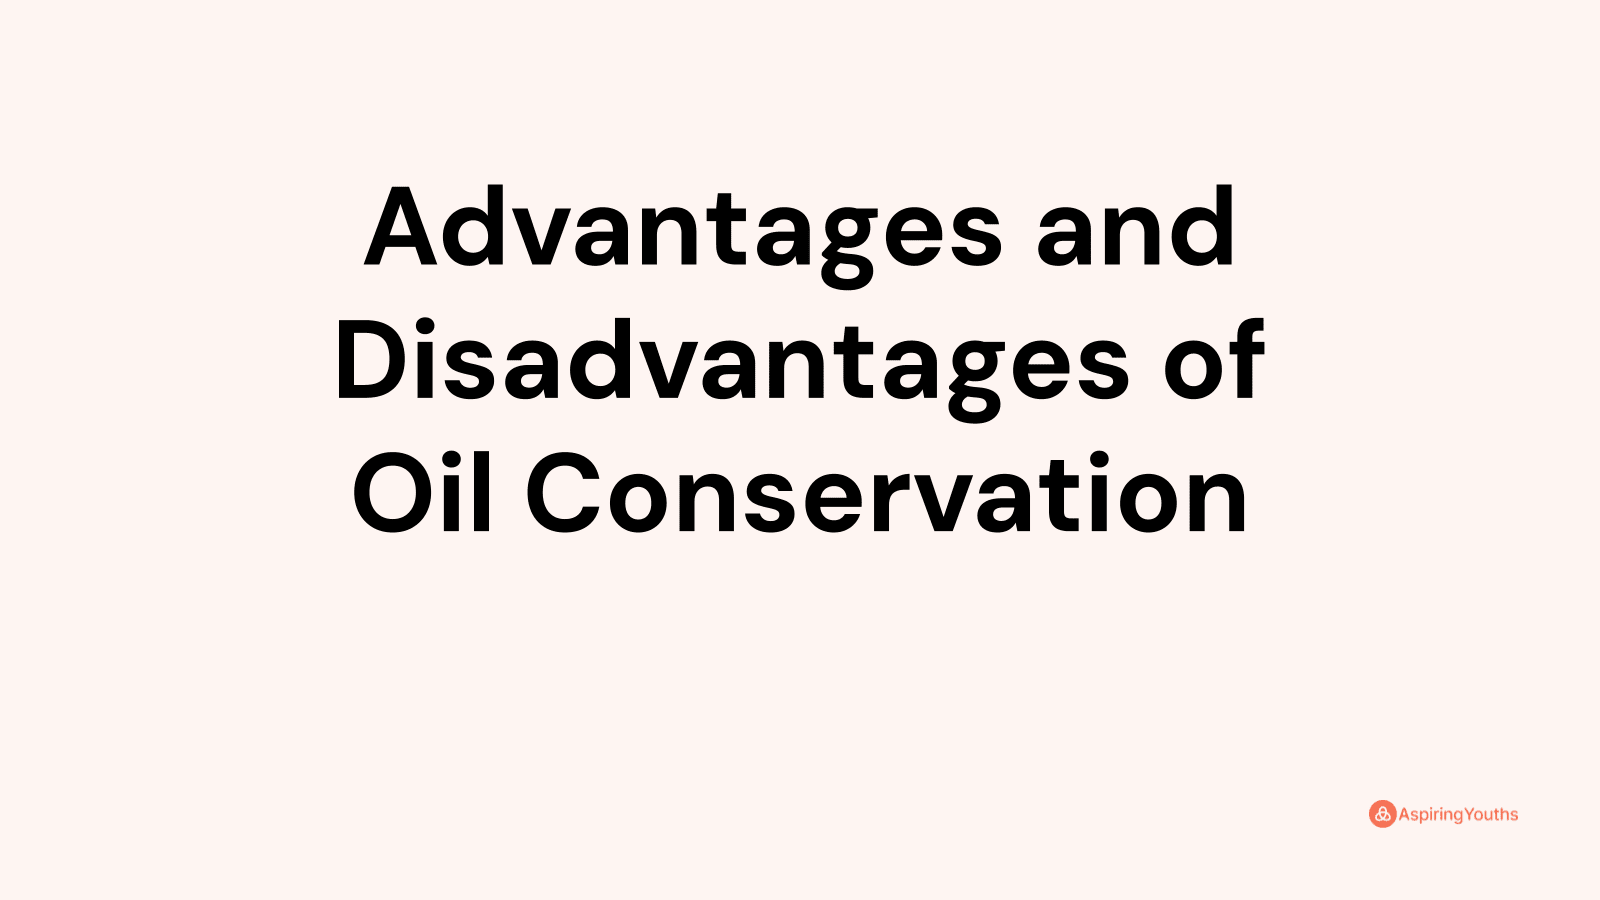 Advantages and disadvantages of Oil Conservation